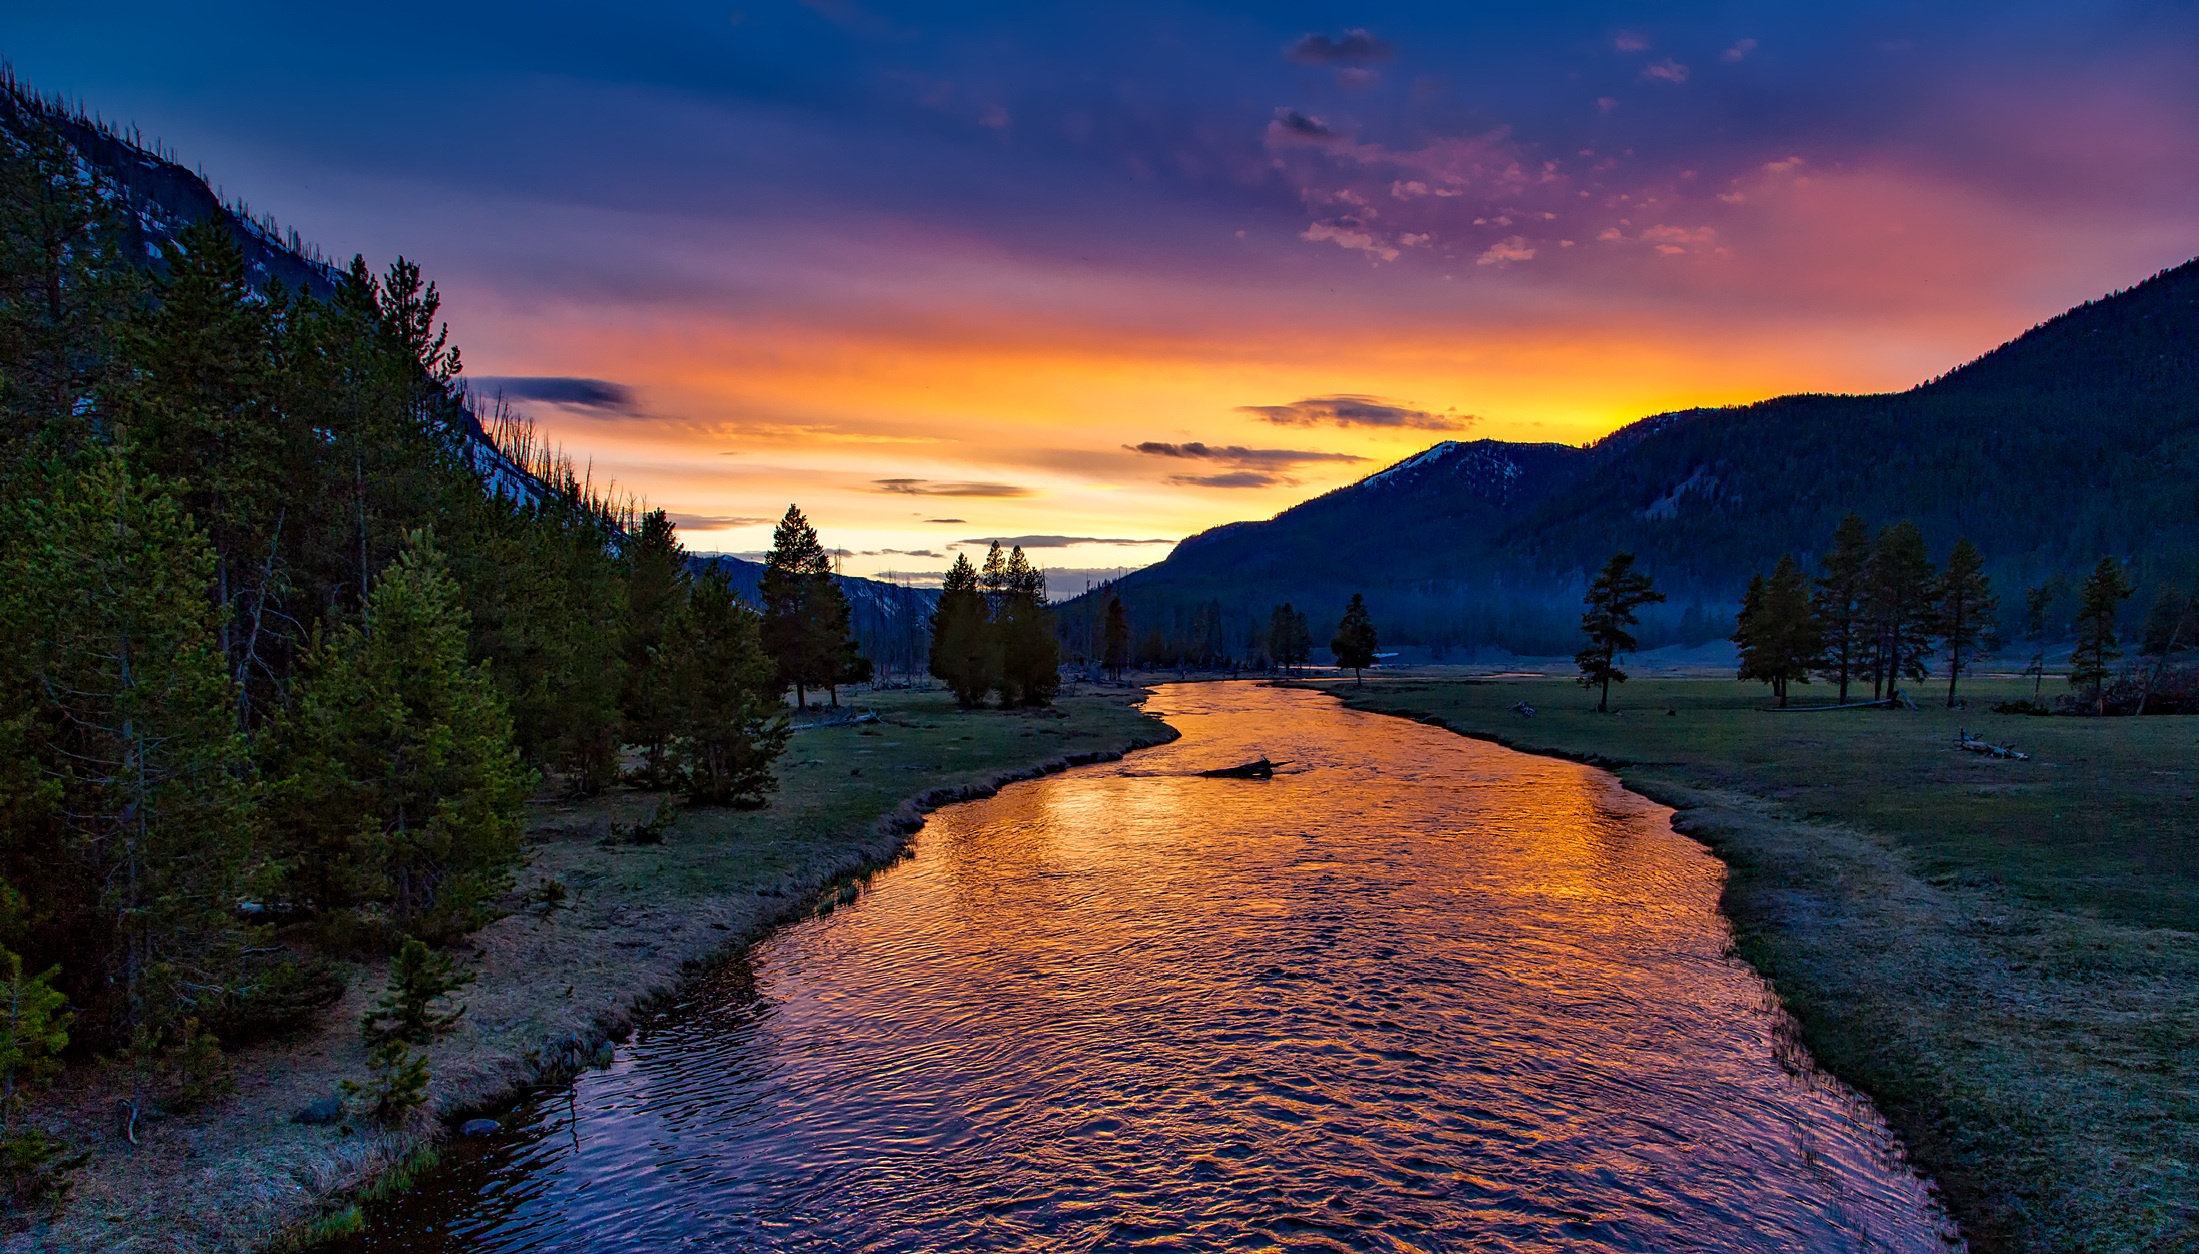 usa, national park, hdr, wilderness, nature, earth, yellowstone national park, dusk, mountain, river, scenic, sunset, tree, twilight